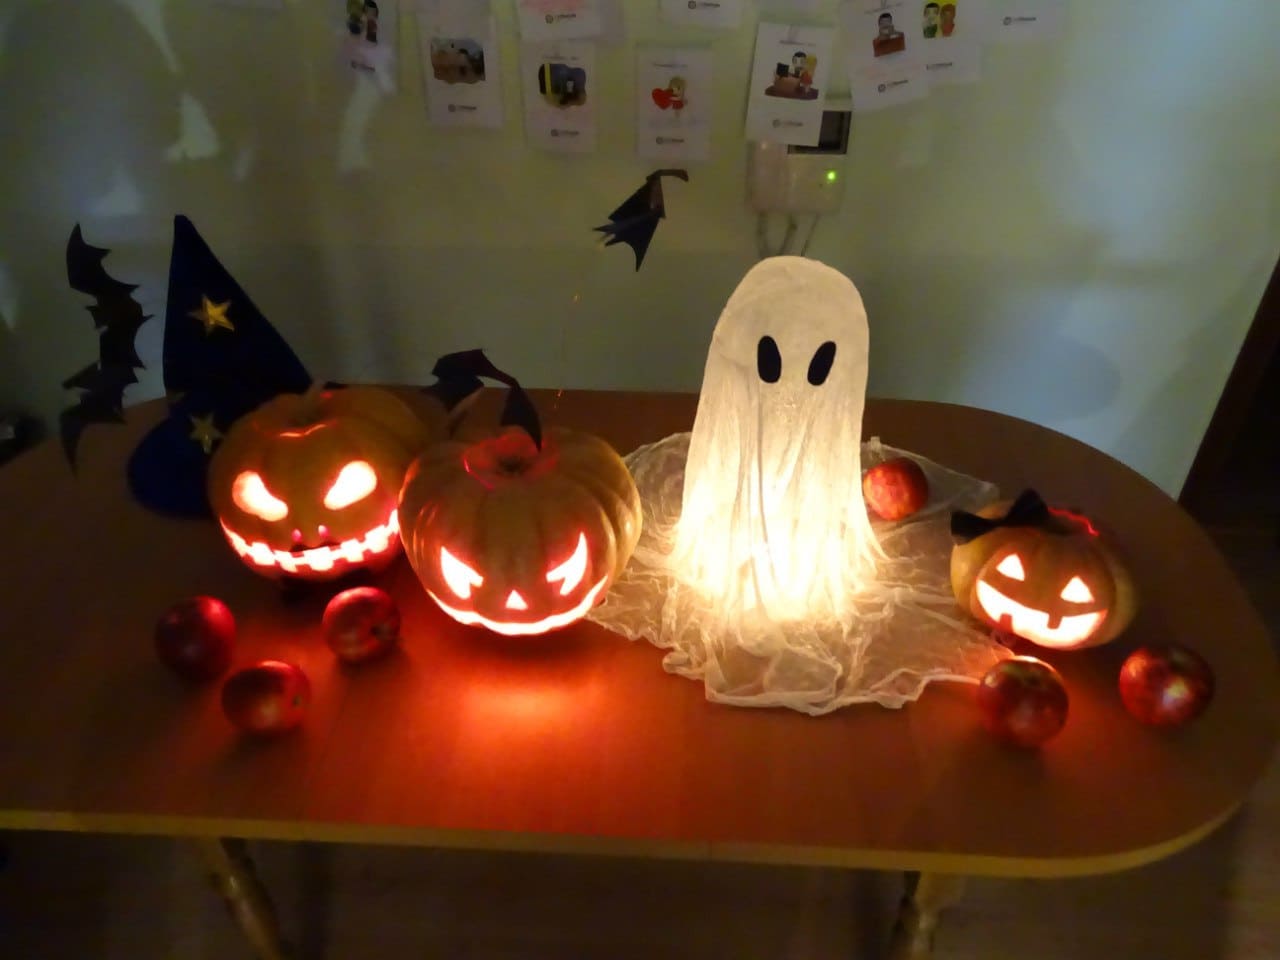 Halloween Jack o lanterns and ghost